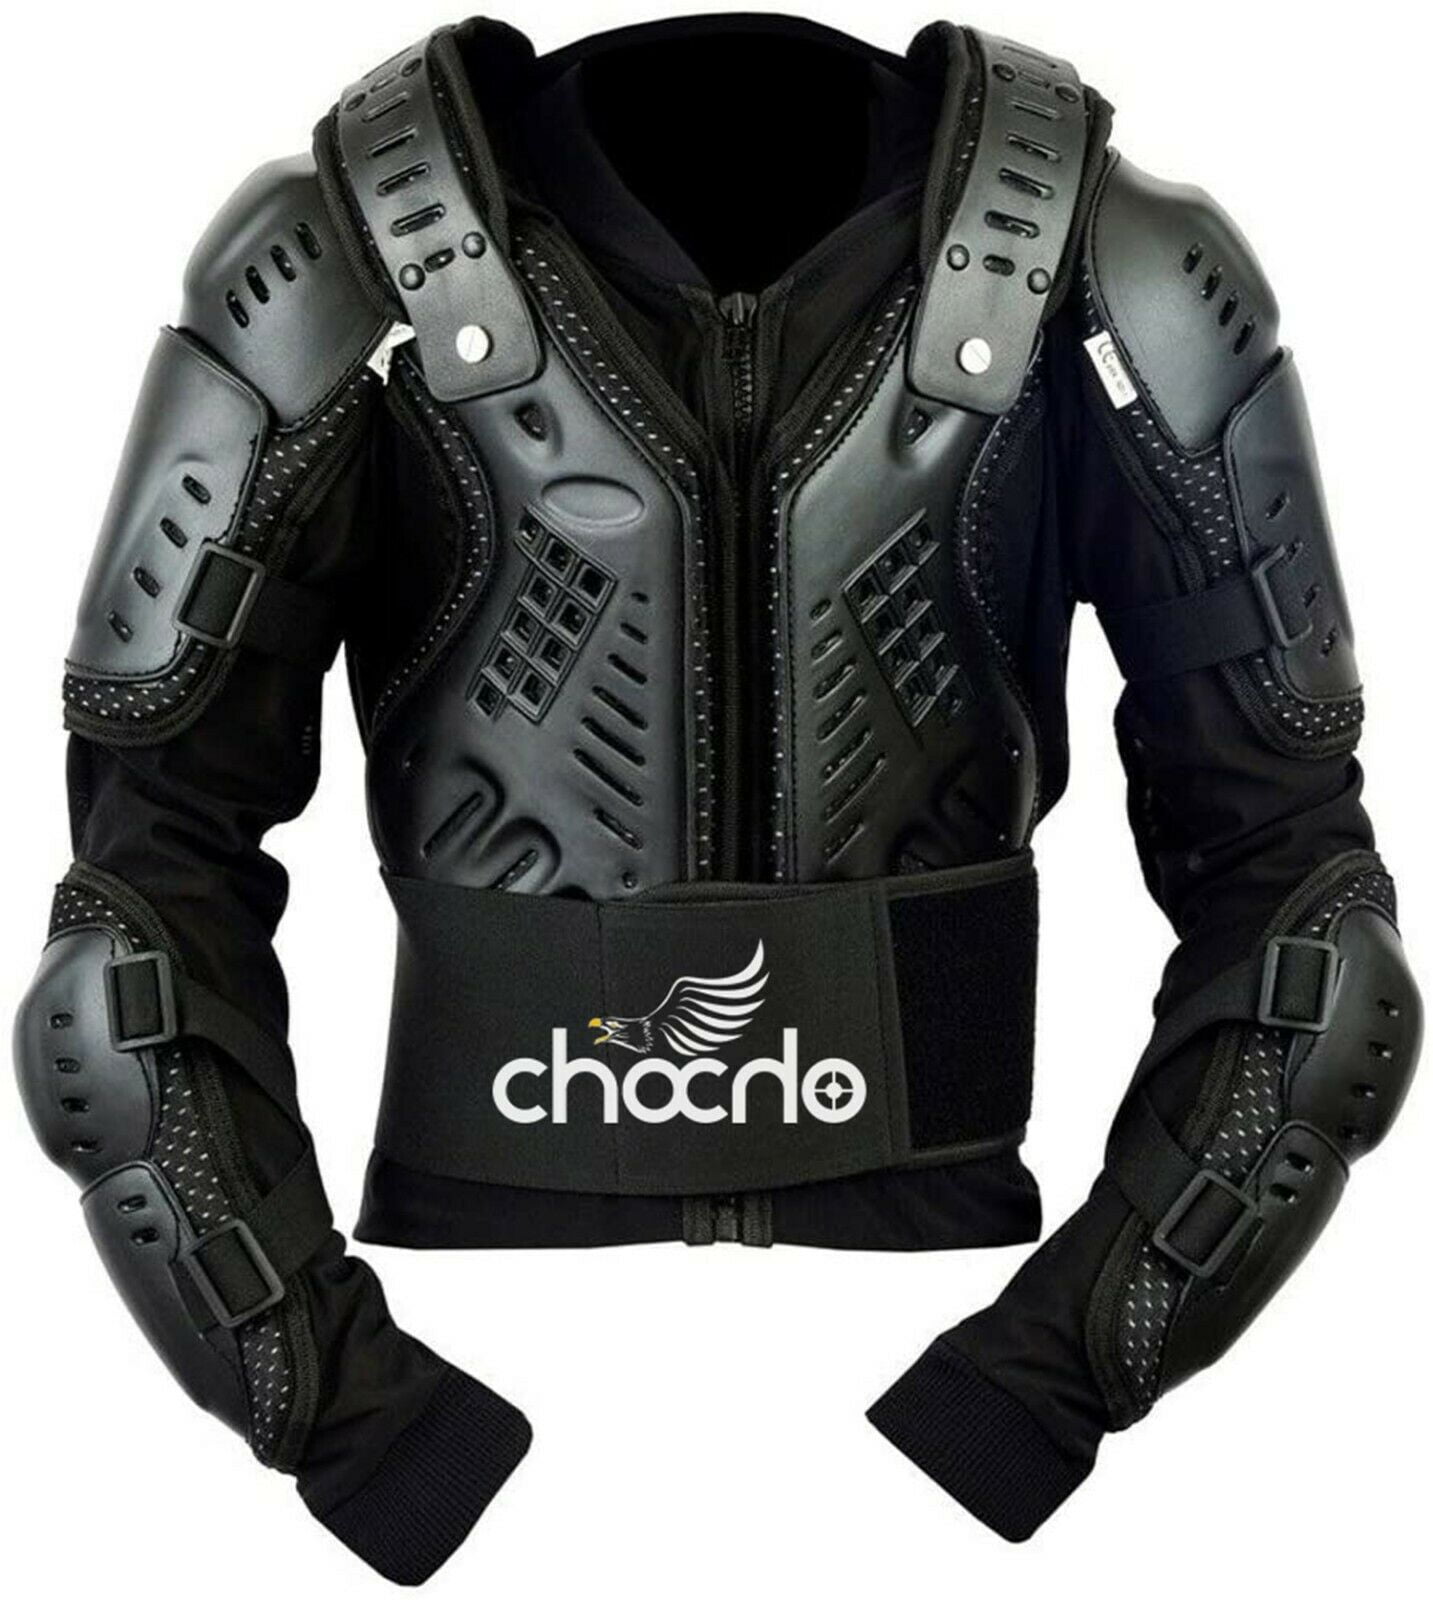 Motorbike Motorcycle Motocross Full Body Armour Protection Spine Protector Black 